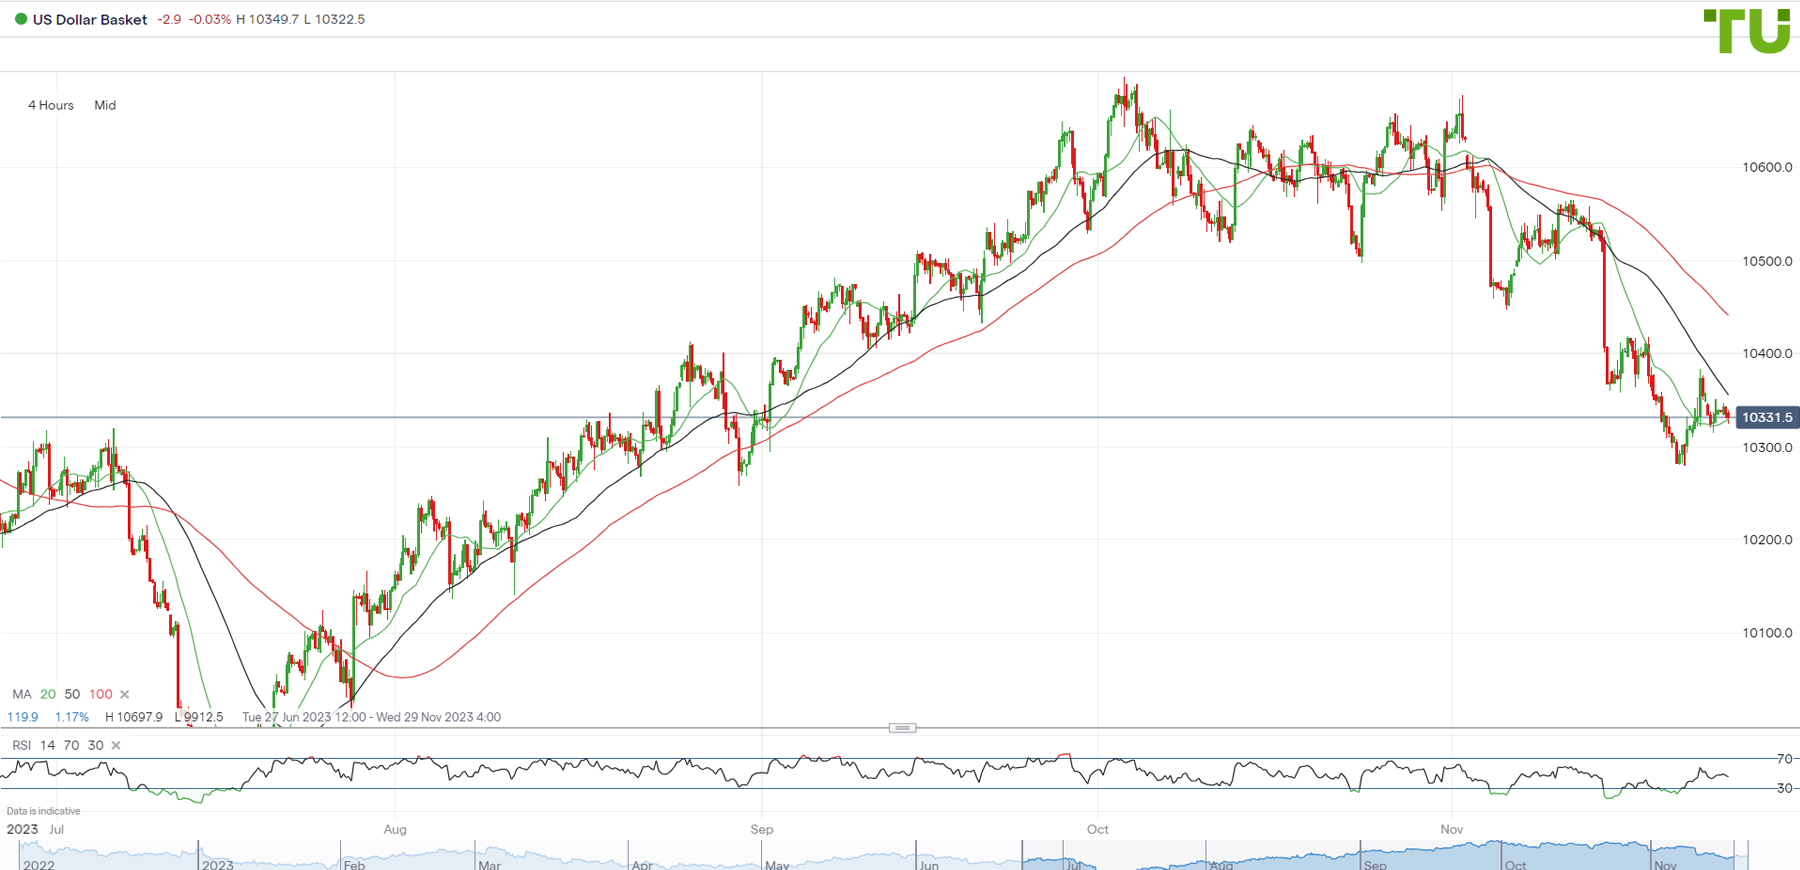 USD INDEX declines after a growth attempt